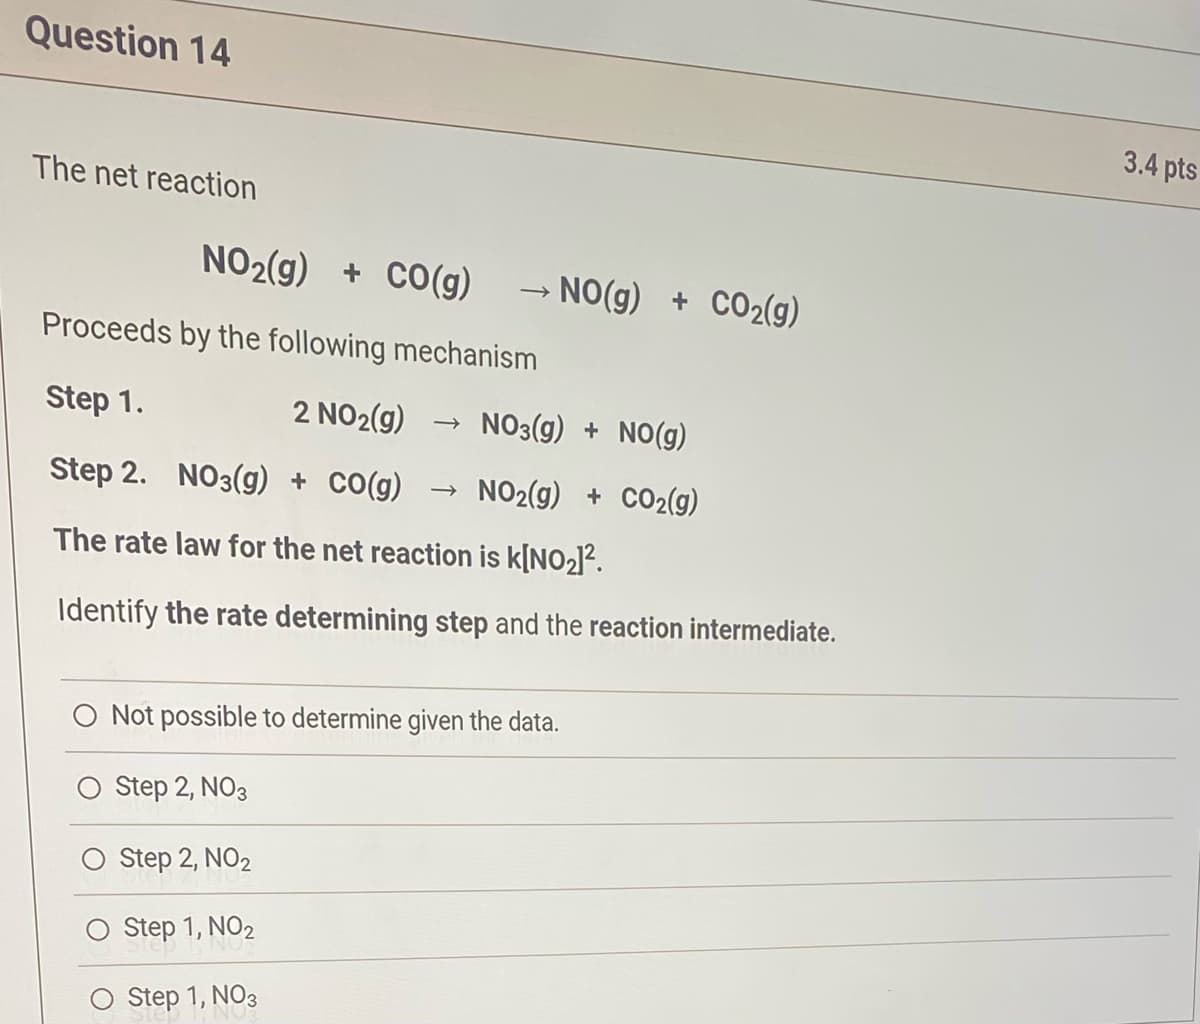 Question 14
The net reaction
NO₂(g) + CO(g) → NO(g) + CO₂(g)
Proceeds by the following mechanism
Step 1.
2 NO₂(g)
NO3(g) + NO(g)
Step 2. NO3(g) + CO(g) → NO2(g) + CO₂(g)
The rate law for the net reaction is k[NO₂]².
Identify the rate determining step and the reaction intermediate.
→>>
O Not possible to determine given the data.
Step 2, NO3
Step 2, NO2
Step 1, NO₂
Step 1, NO3
3.4 pts